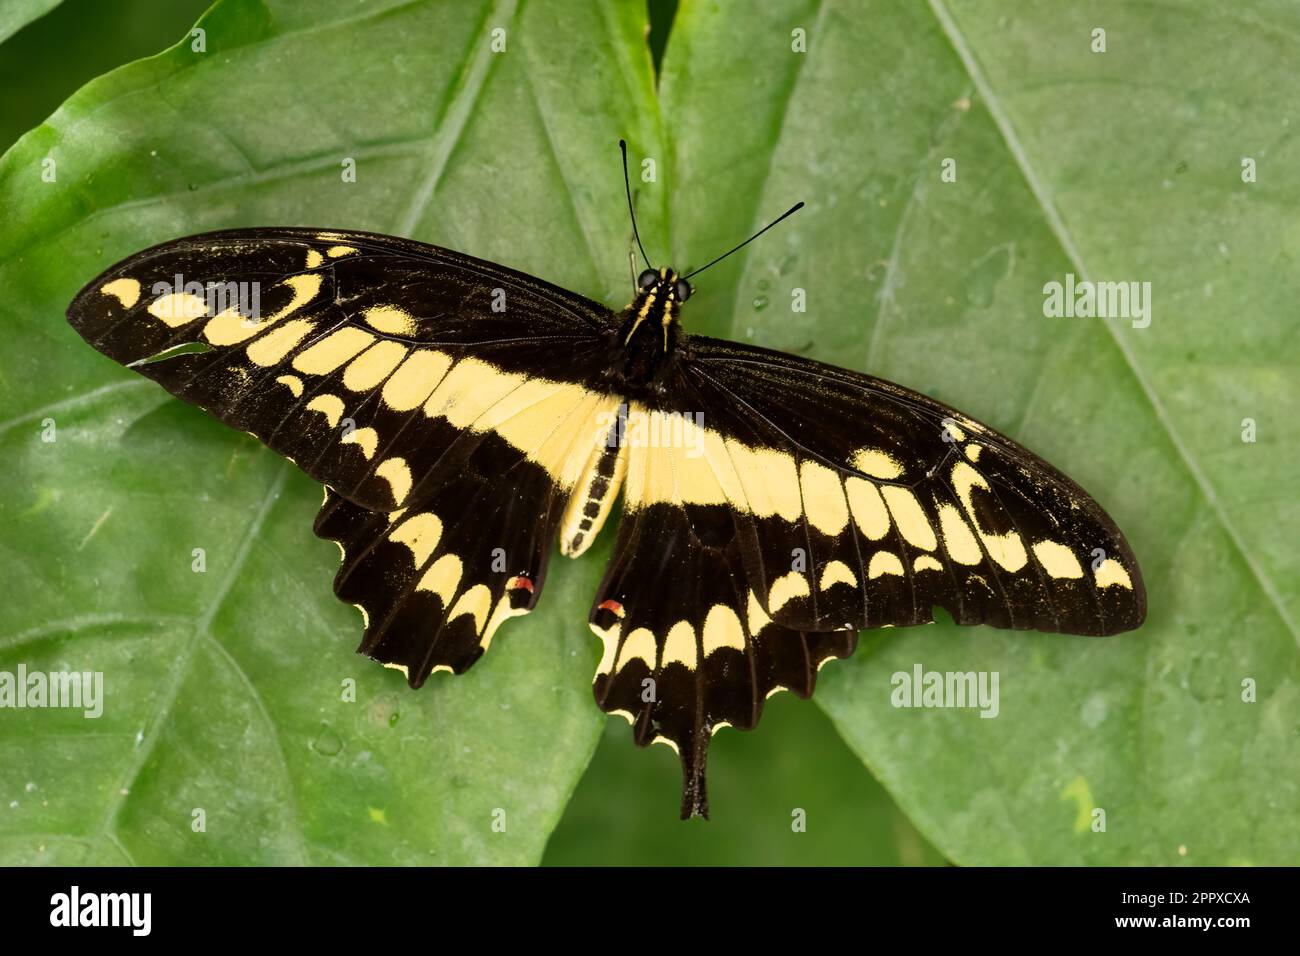 Thoas Swallowtail - Papilio thoas, large beautiful colored tropical butterfly from Central and Latin America woodlands, meadows and gardens, Panama. Stock Photo